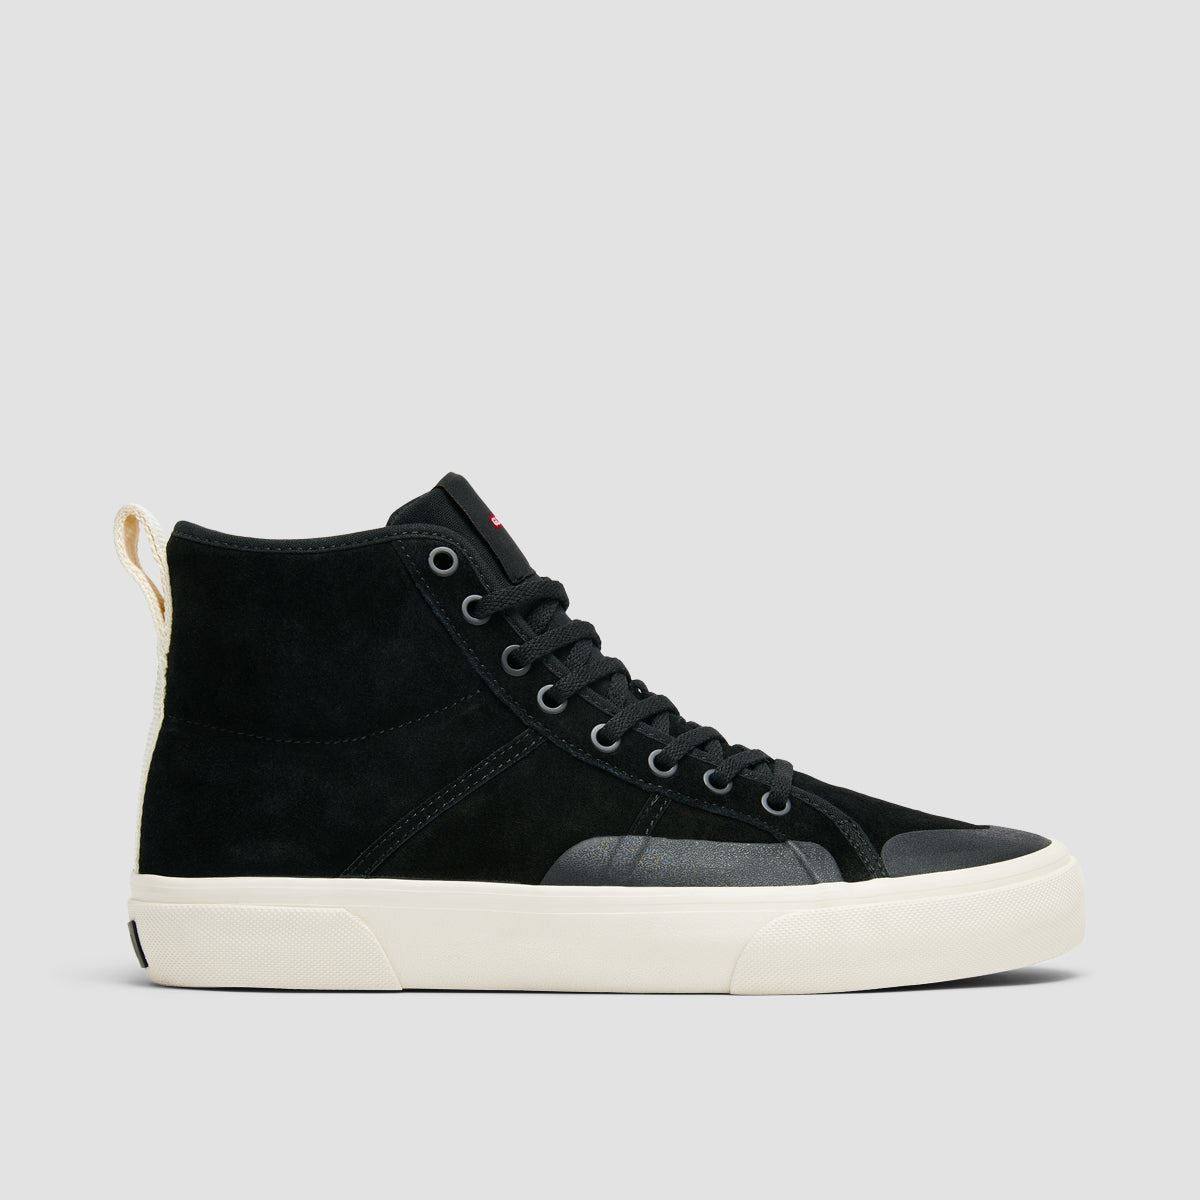 Globe Los Angered II High Top Shoes - Black/Antique